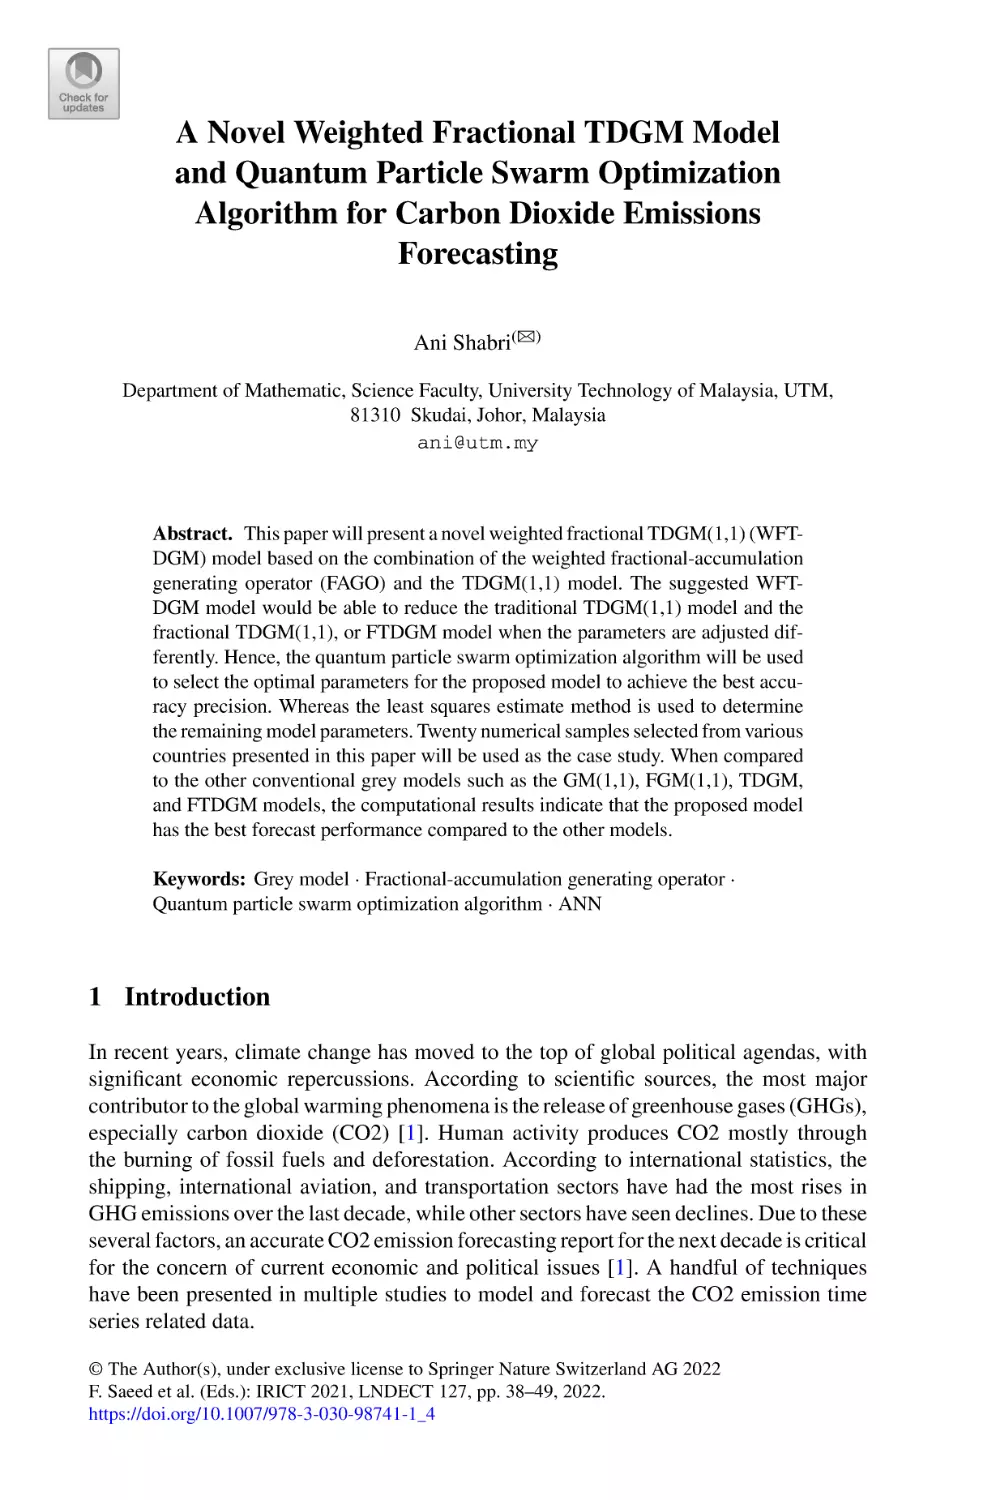 A Novel Weighted Fractional TDGM Model and Quantum Particle Swarm Optimization Algorithm for Carbon Dioxide Emissions Forecasting
1 Introduction